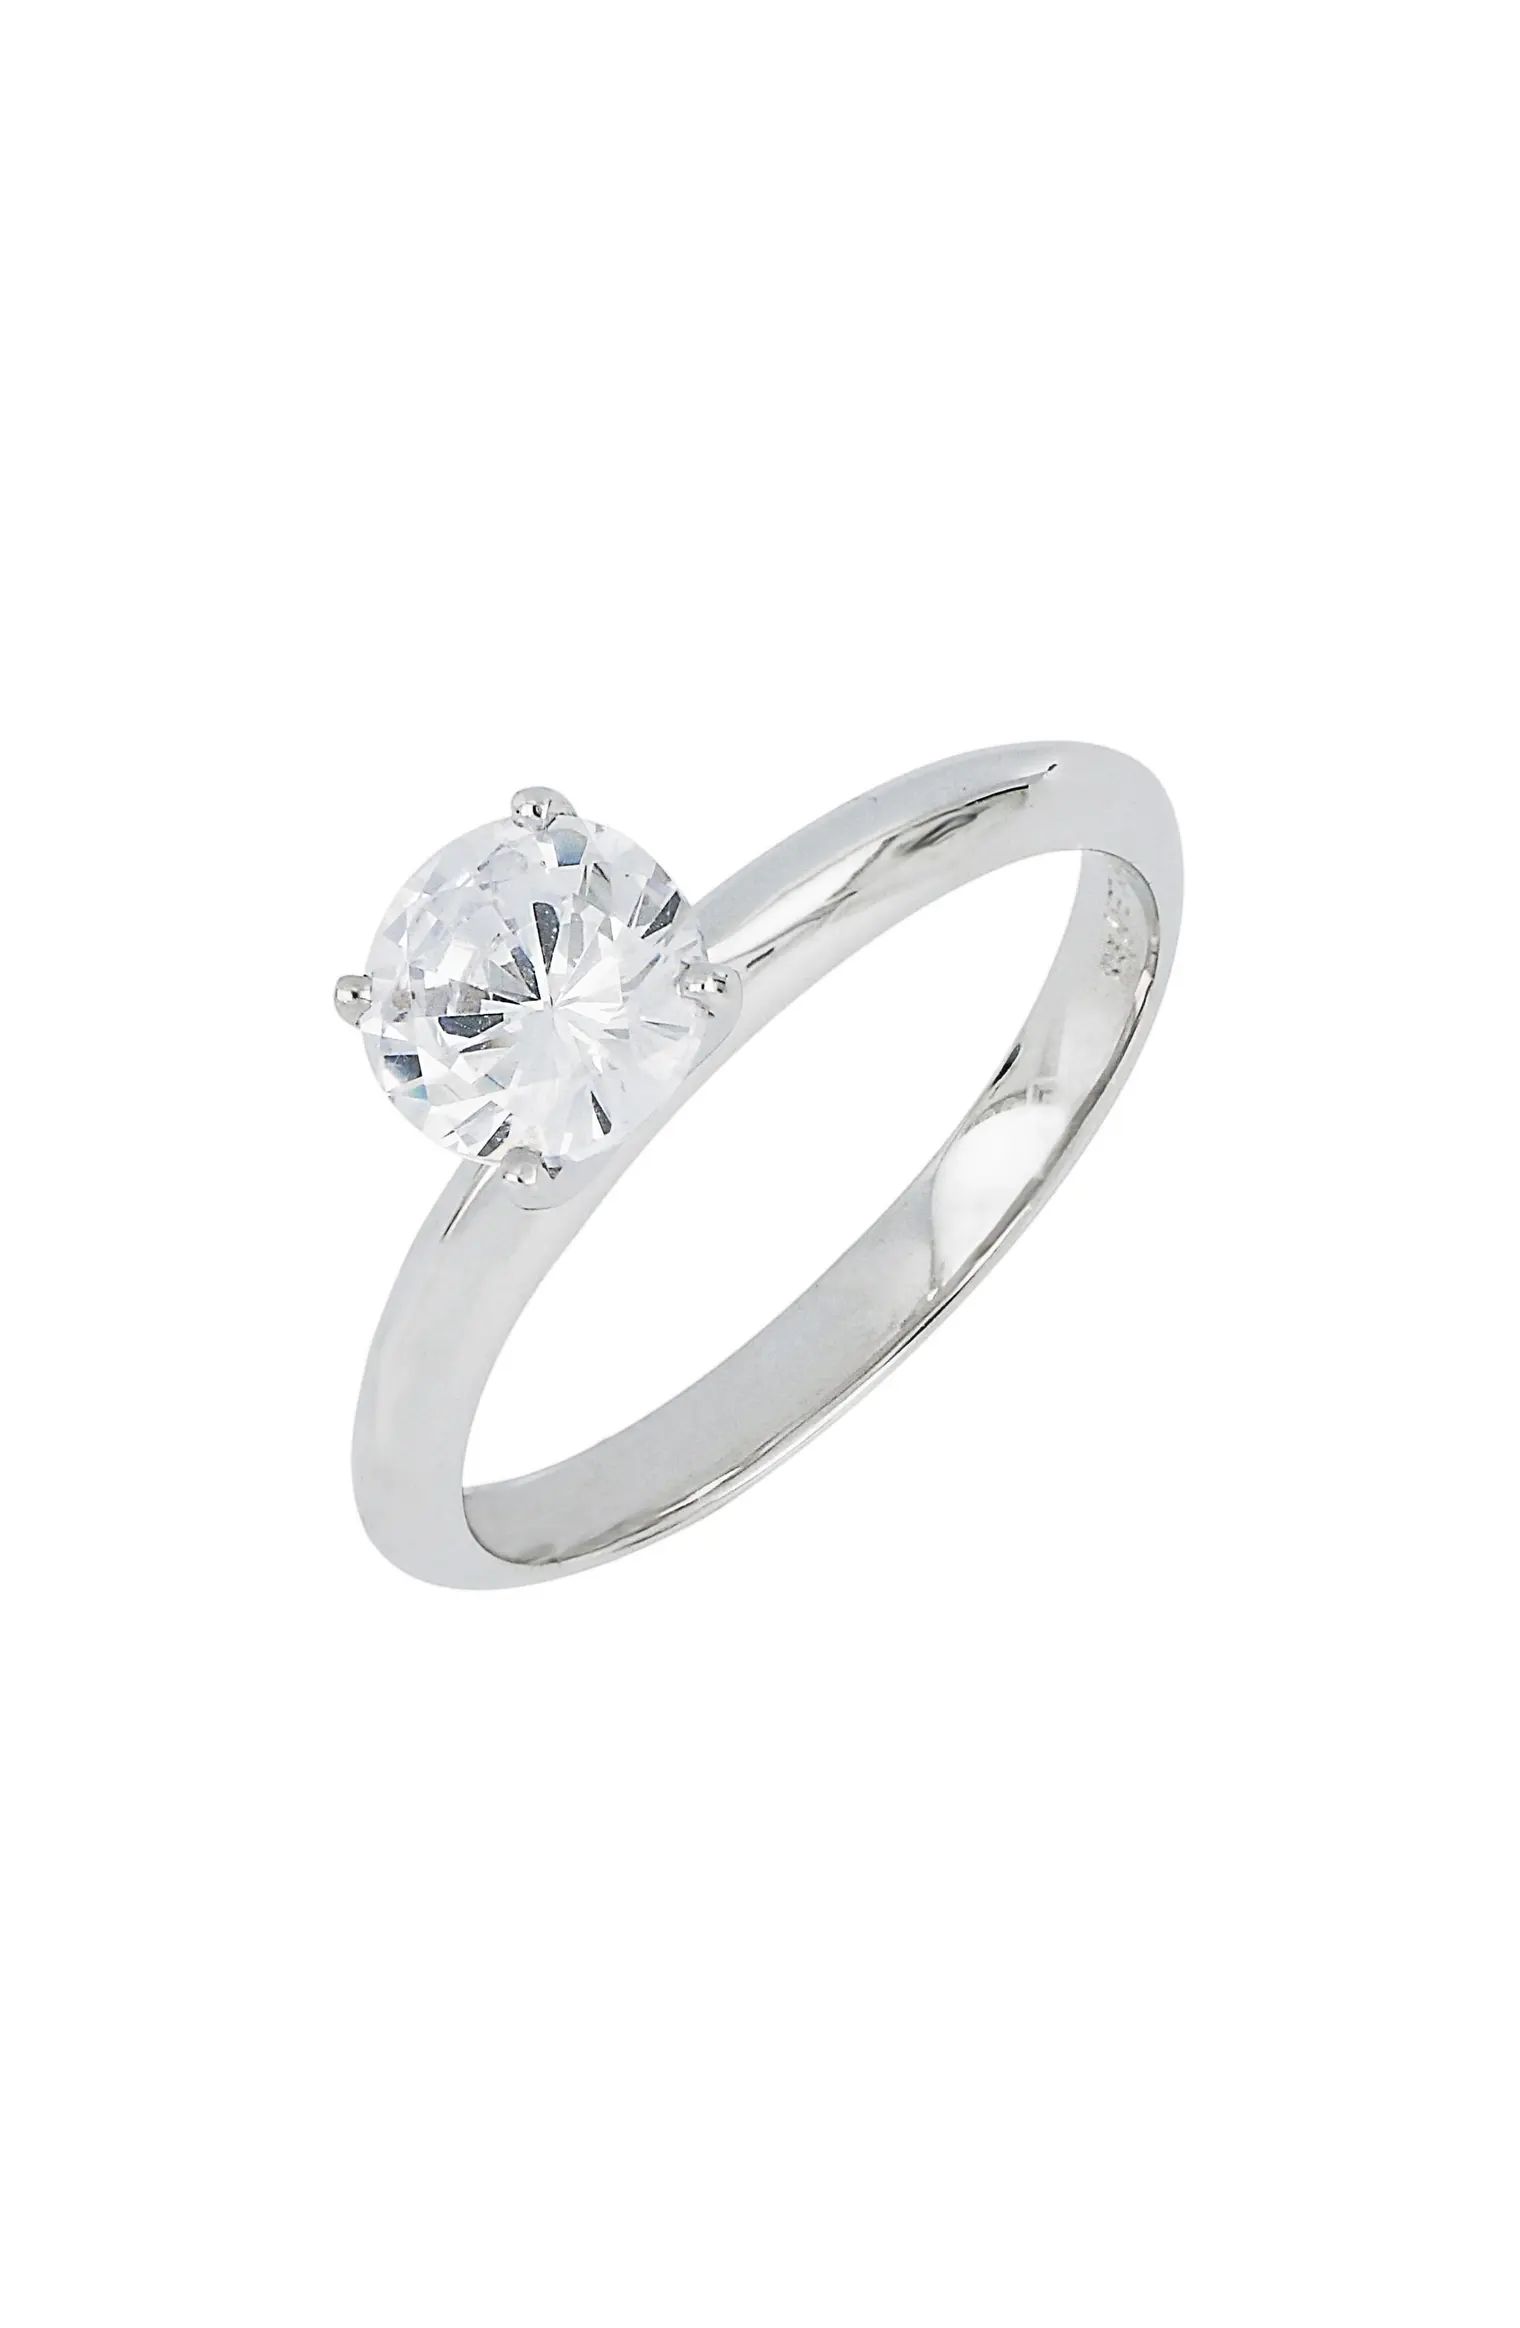 Solitaire Engagement Ring Setting | Nordstrom